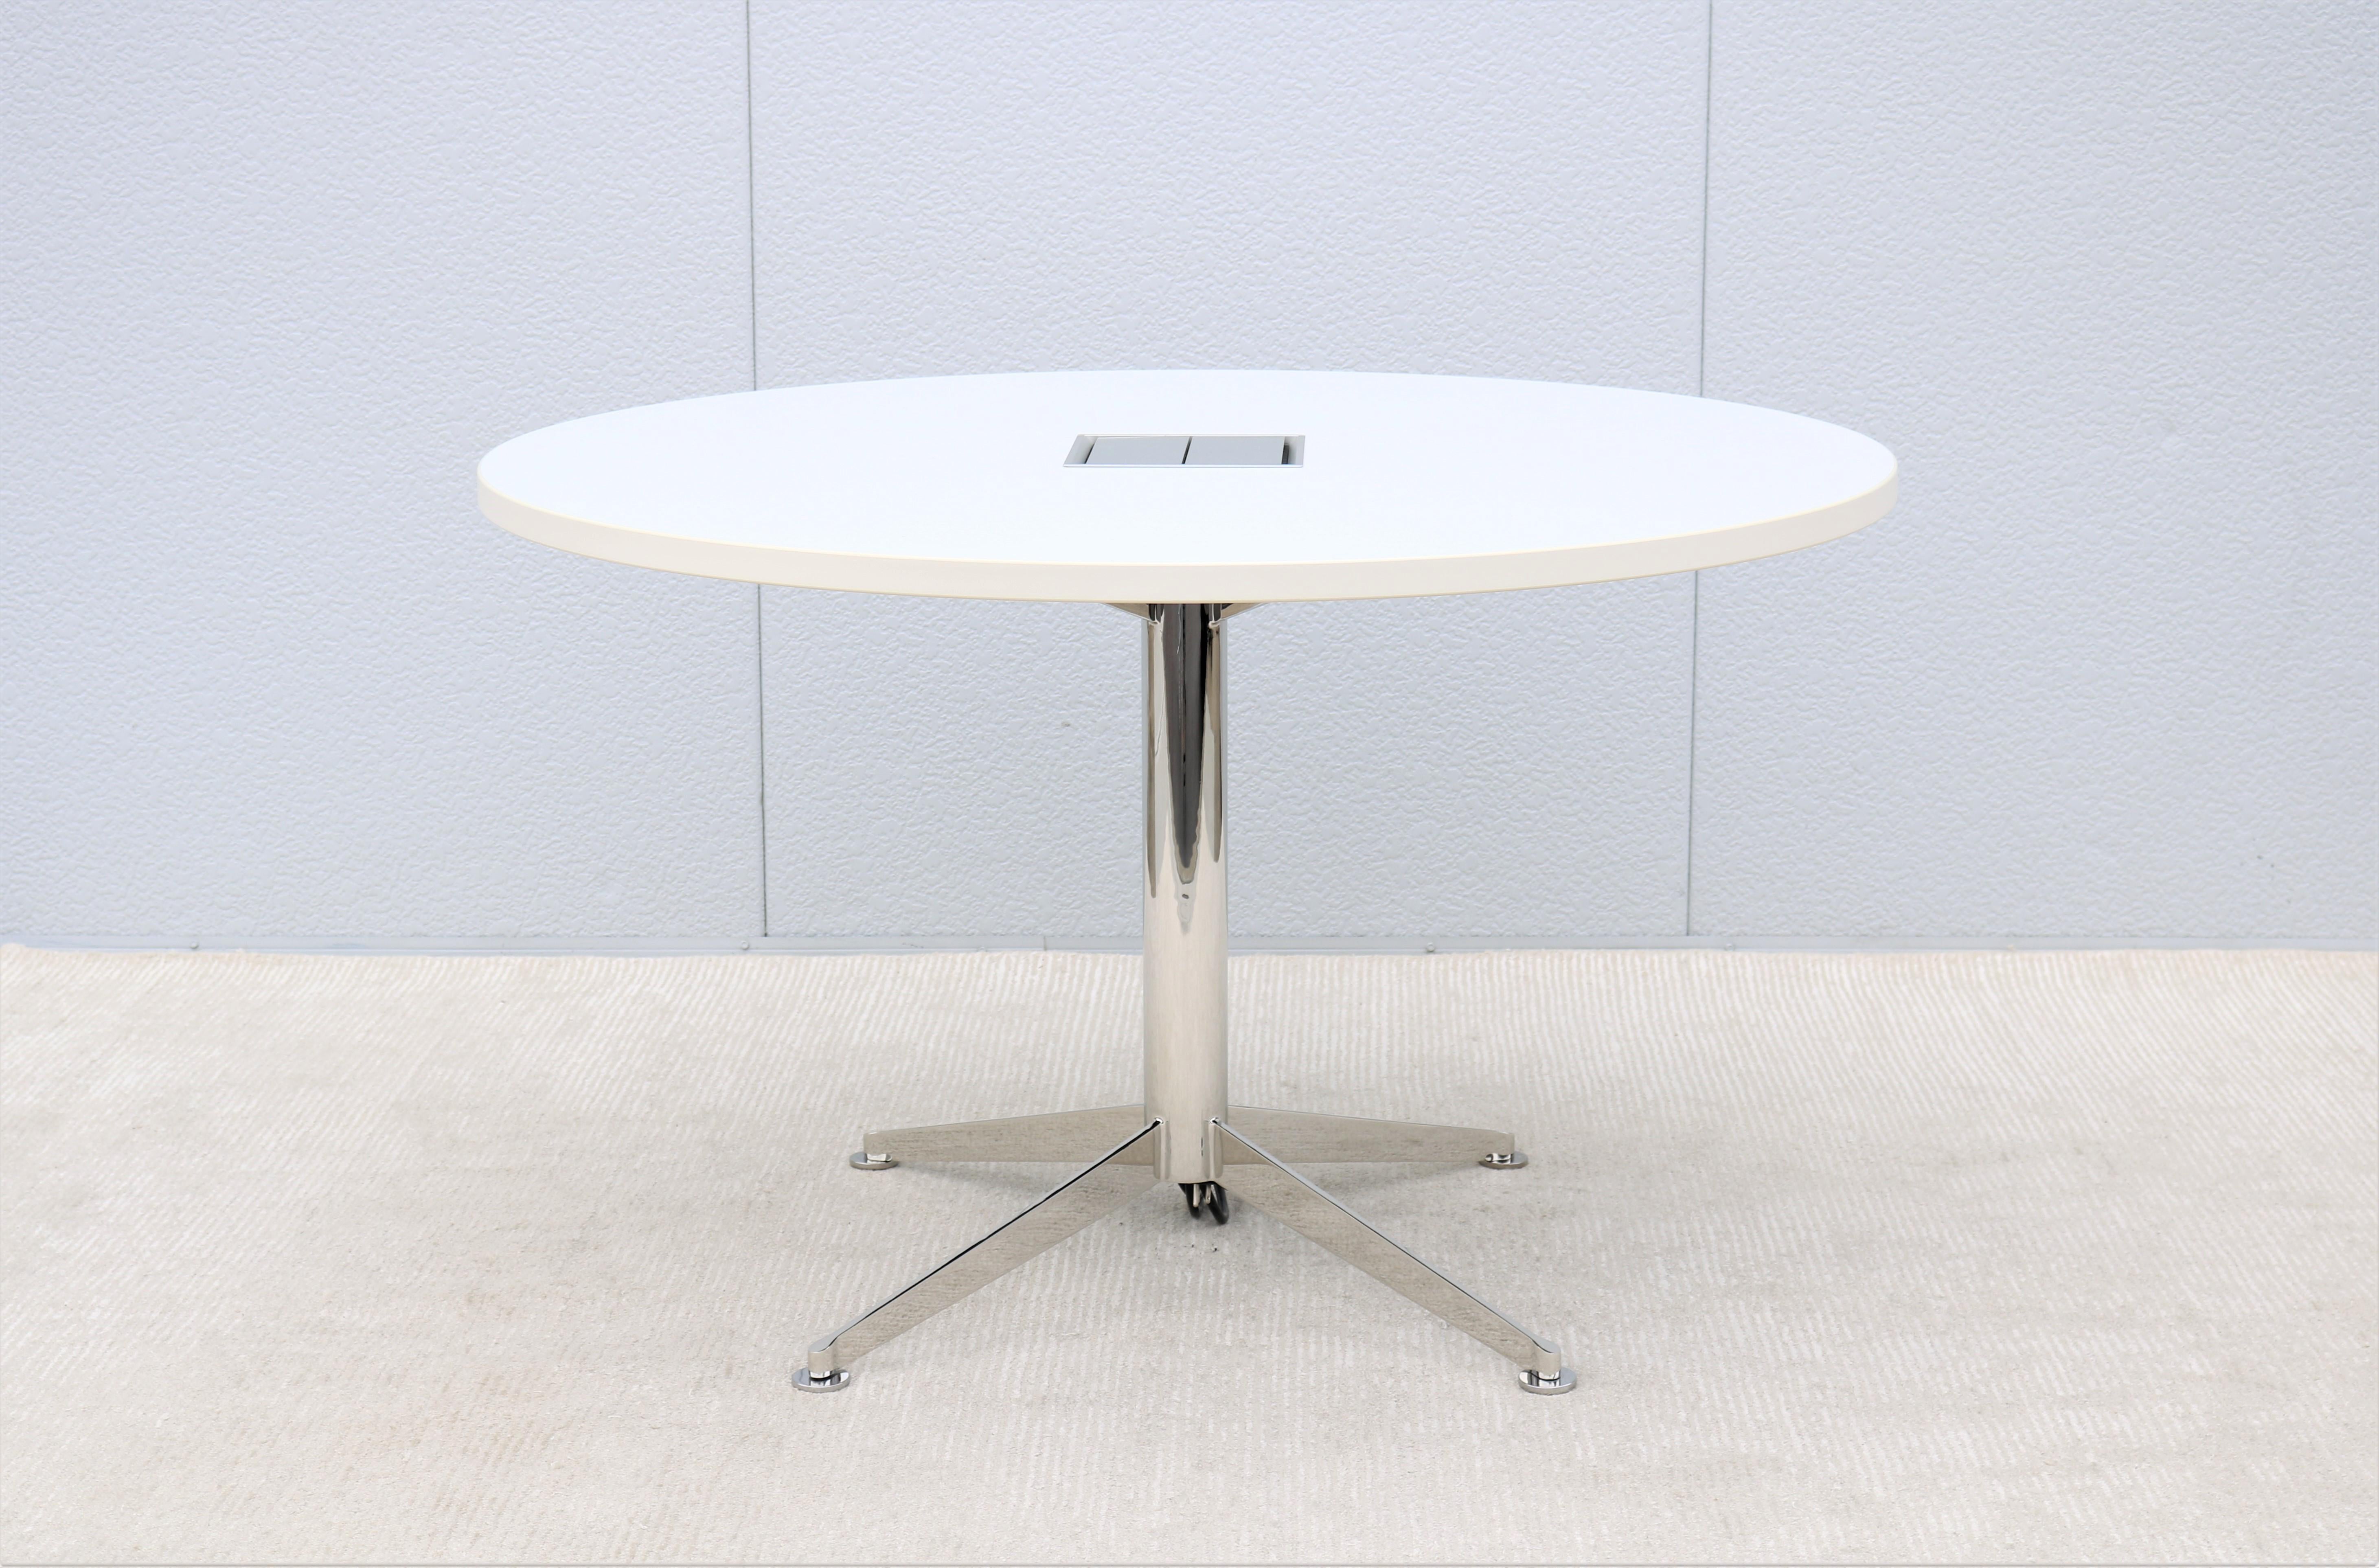 Elegant and sleek Circuit conference table or work table by Bernhardt Design.
This fabulous table has the strength and durability to provide reliable performance.
The modern beauty and smart design of the Circuit table will integrate simply and